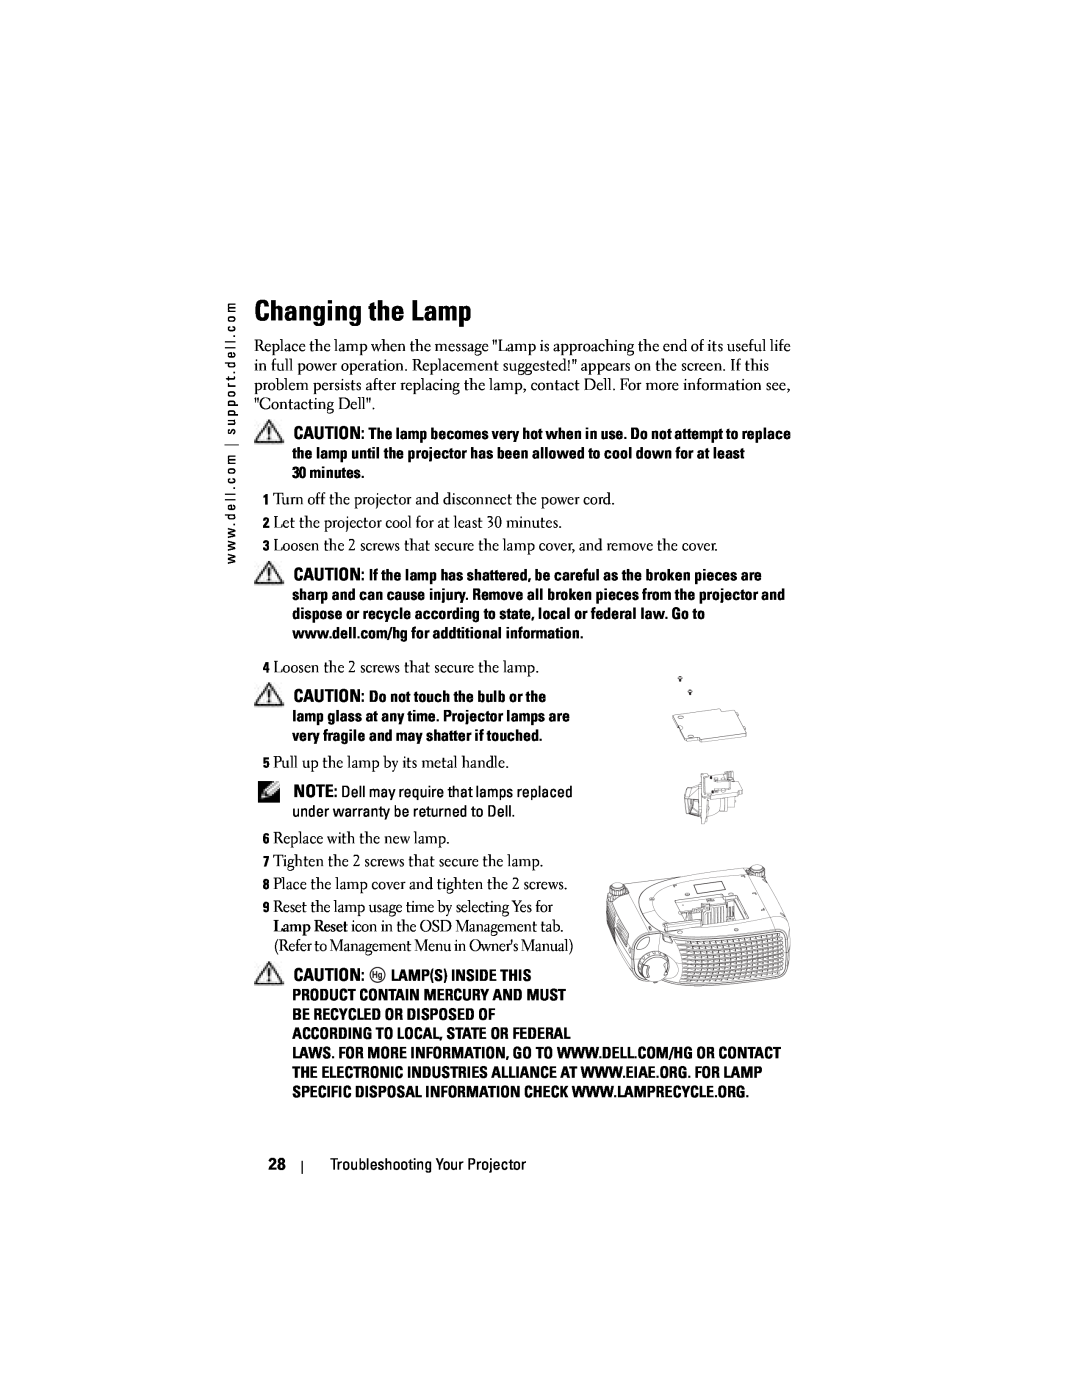 Dell 1200MP owner manual Changing the Lamp, minutes, Troubleshooting Your Projector 